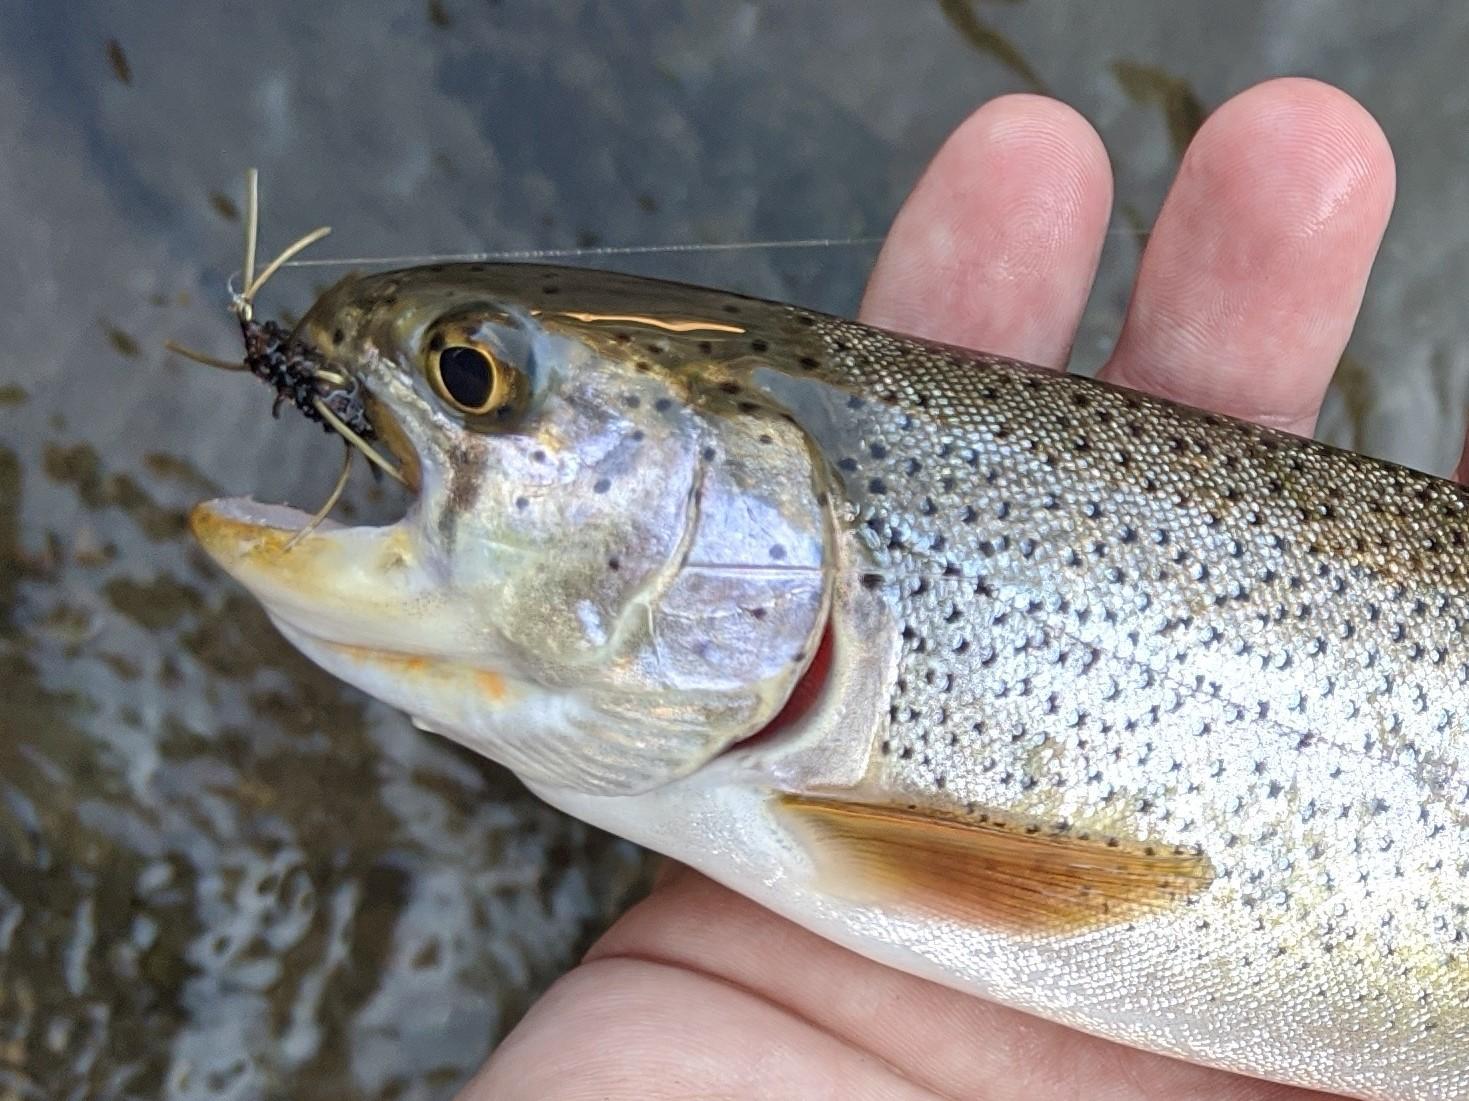 Texas Fly Fishing, Catch and release, how to handle fish